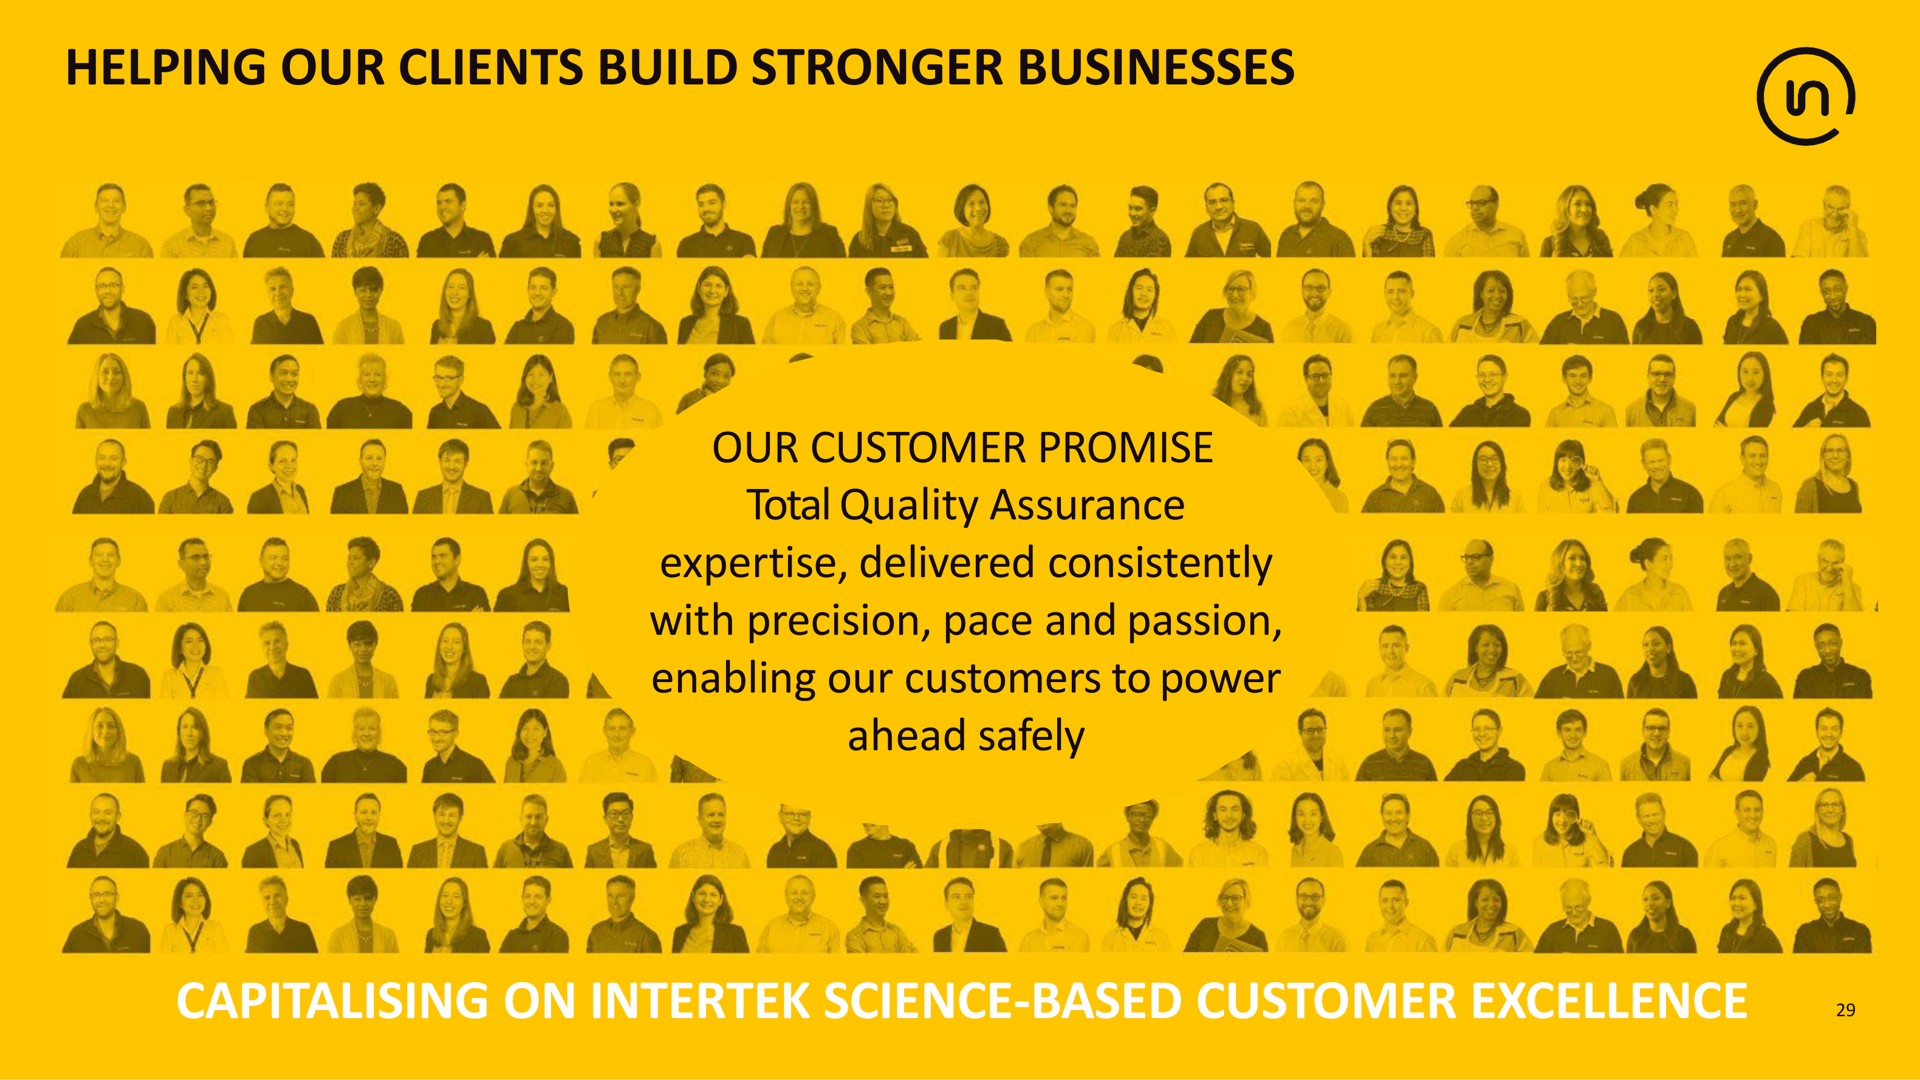 helping our clients build businesses our customer promise total quality assurance delivered consistently with precision pace and passion enabling our customers to power ahead safely on science based customer excellence iba las a a a wee nae a am amide an a the dae | Intertek